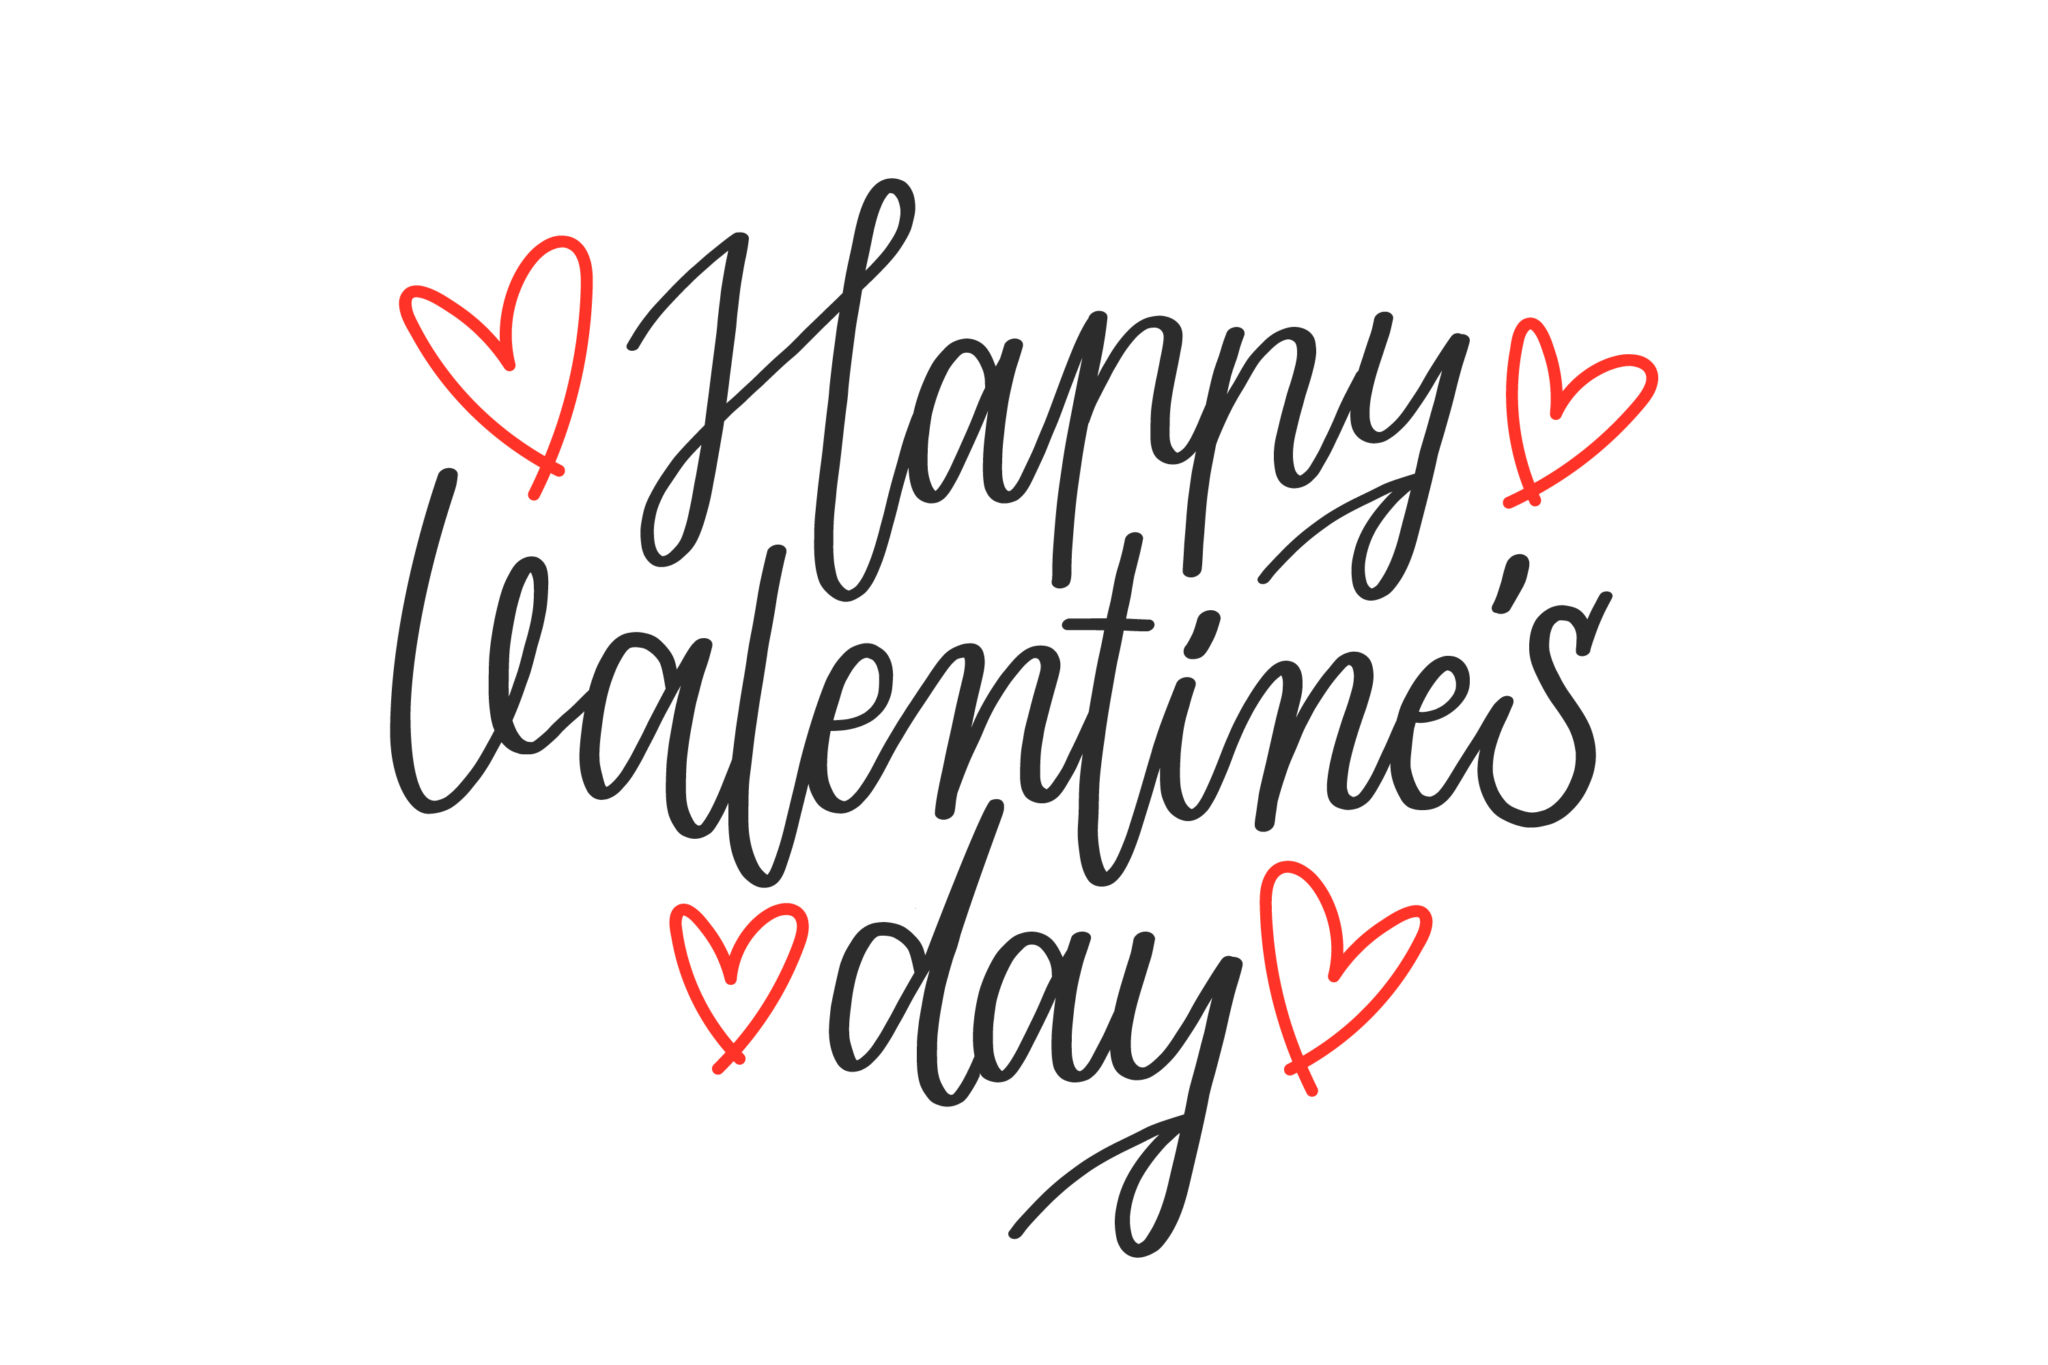 Image by <a href="https://www.freepik.com/free-vector/happy-valentine-s-day-lettering_6587730.htm#page=2&query=Happy%20Valentine's%20Day&position=23&from_view=search&track=ais&uuid=bb960196-9ed6-4965-b1e7-4bbb88cb610f">Freepik</a>